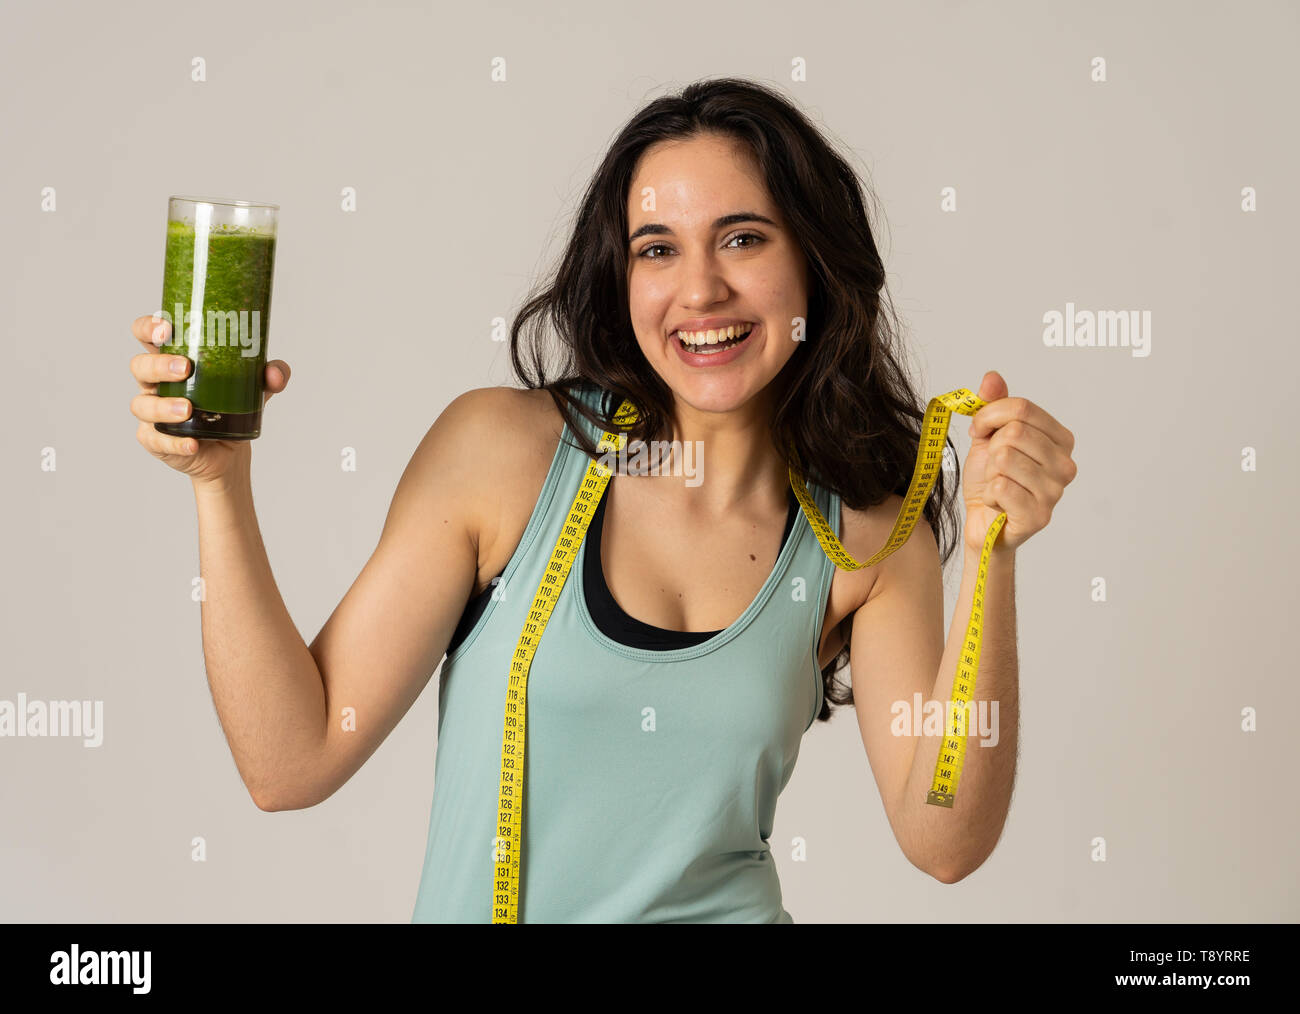 Fitness woman smiling happy with diet plan to loose weight; exercise and green vegetable smoothie healthy drink. In Beauty body care, Health Fitness D Stock Photo